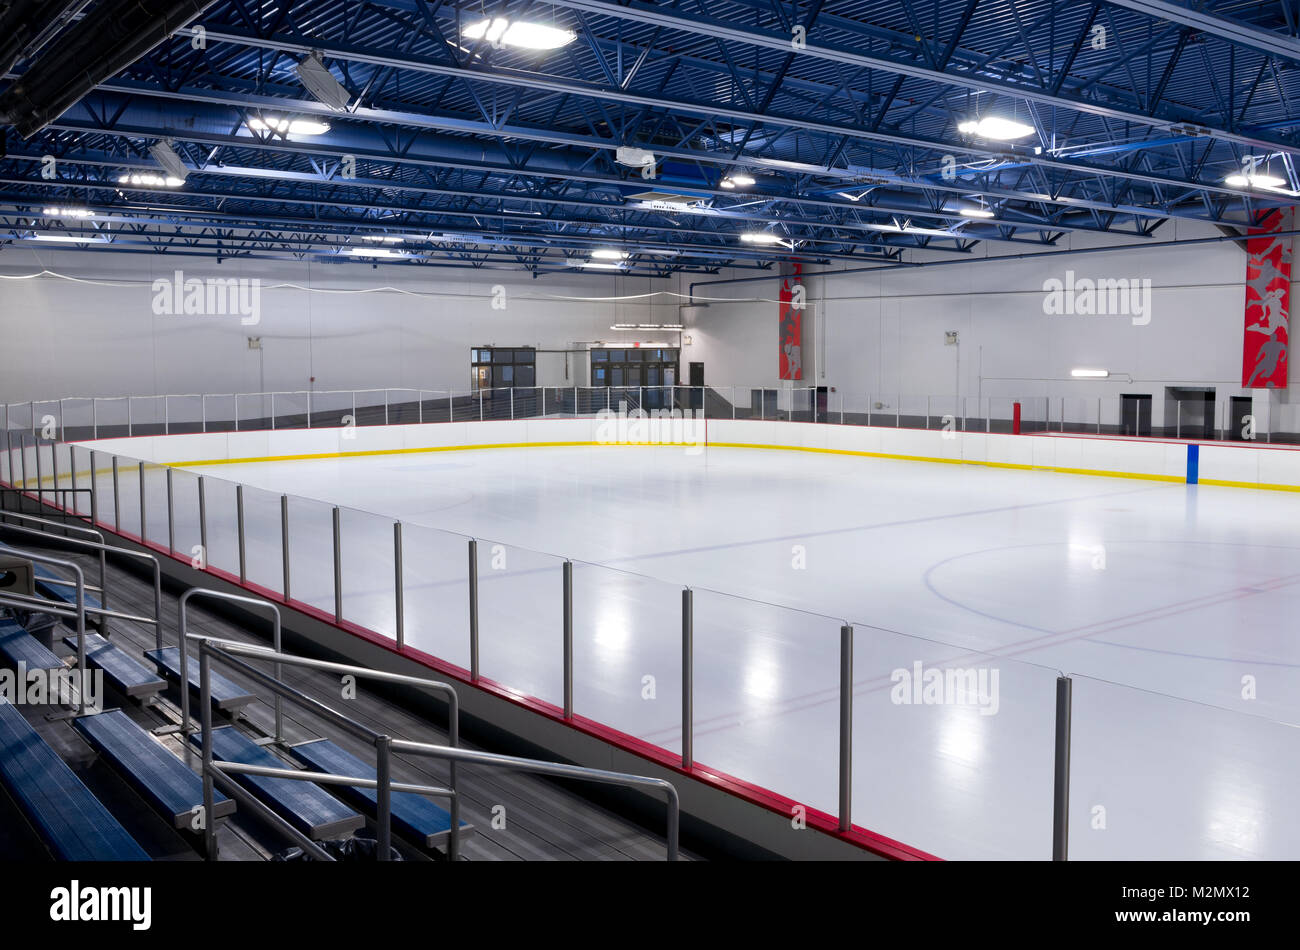 well lit interior of hockey rink at ice arena in inver grove heights minnesota Stock Photo